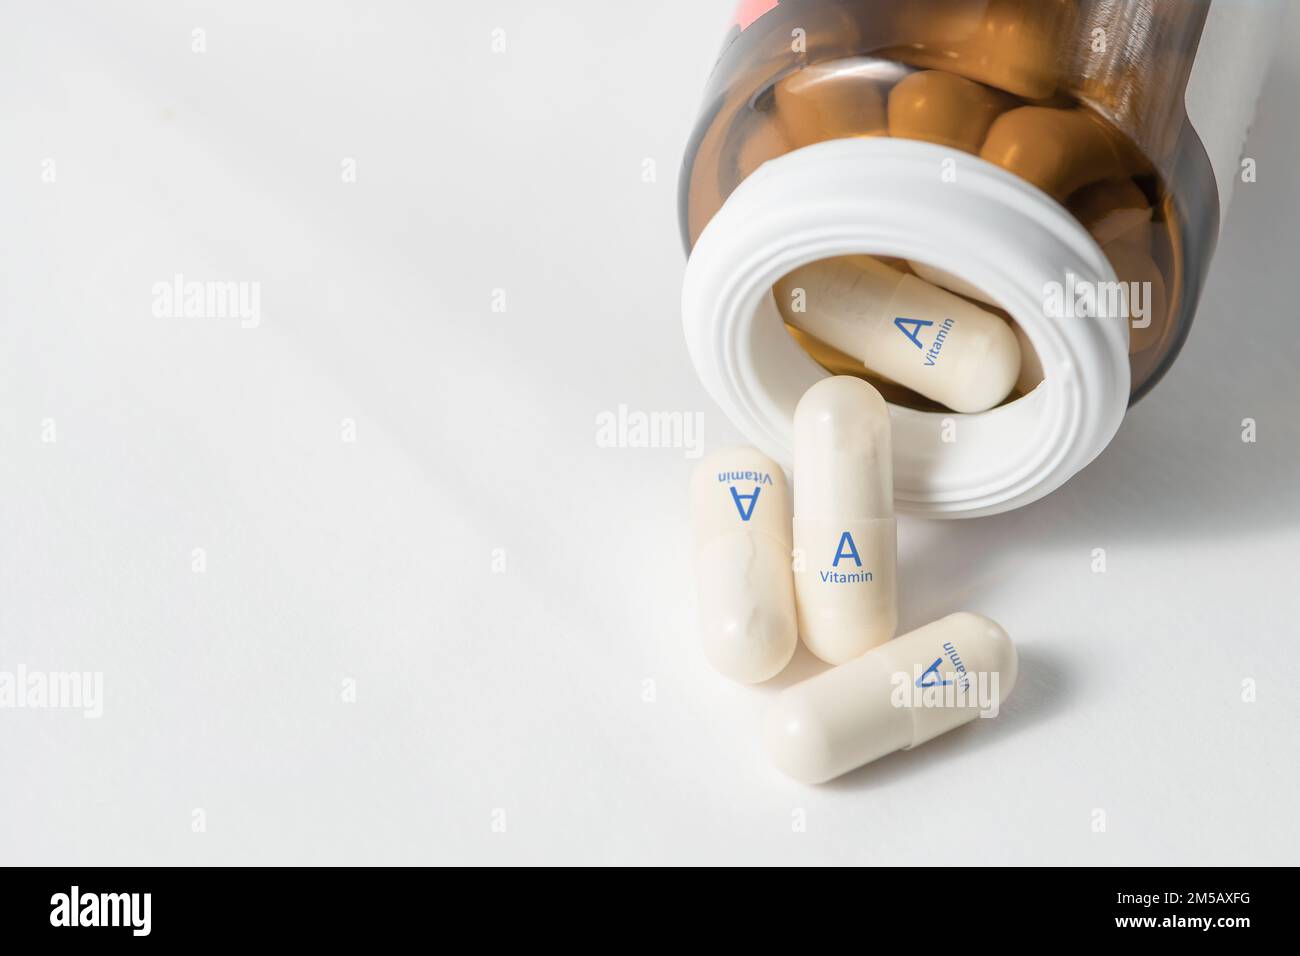 Vitamin A. Vitamins in capsules for the health of teeth, bones, mucous membranes and skin. White capsules with vitamin A or retinol are scattered on Stock Photo